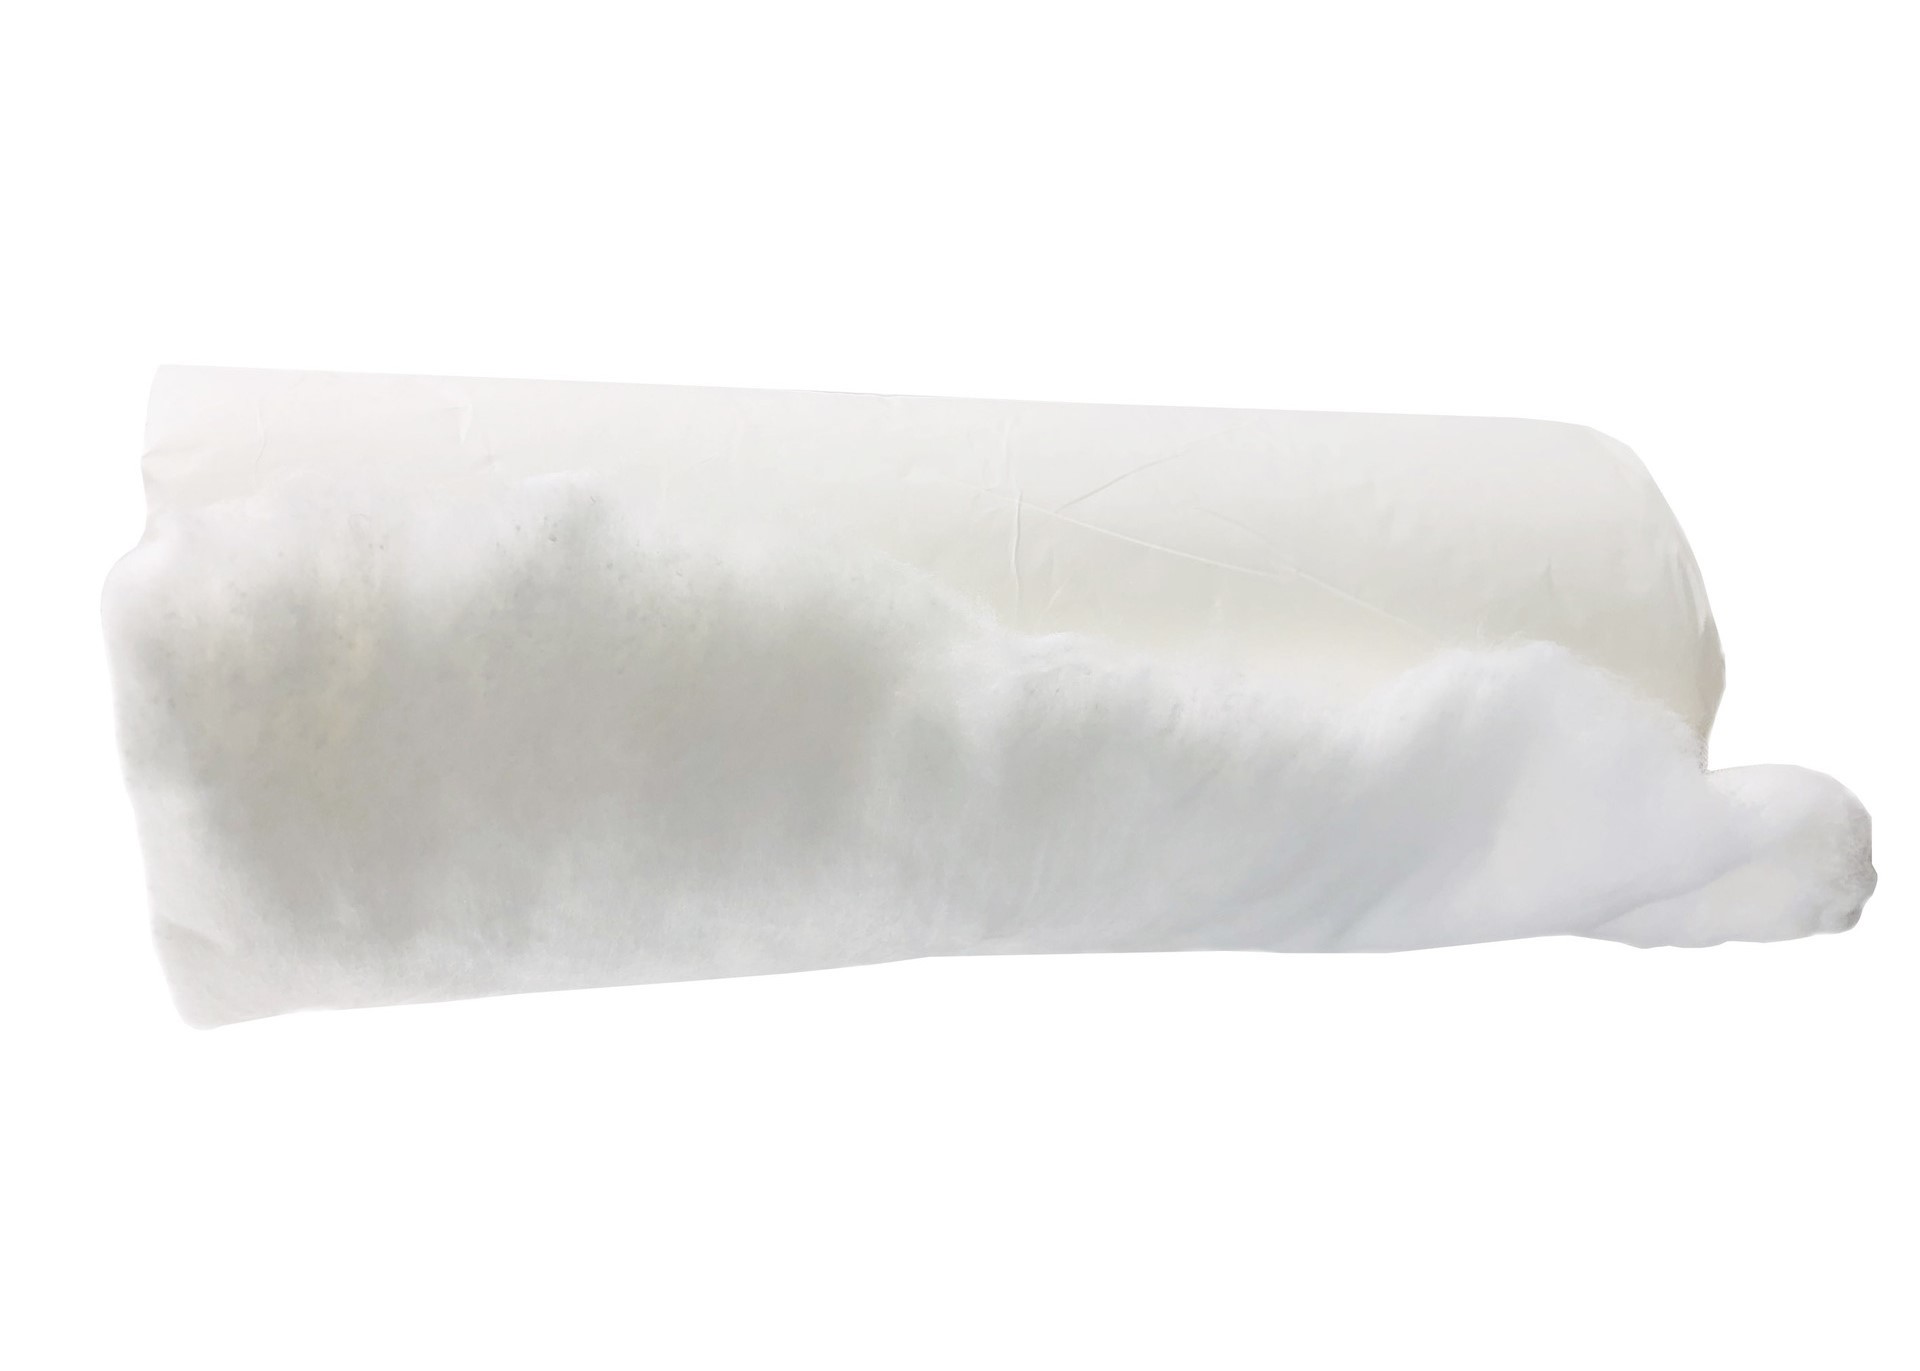  Disposable Absorbent Cotton Roll 100% Plain Medical Compressed Gauze Roll Manufactures